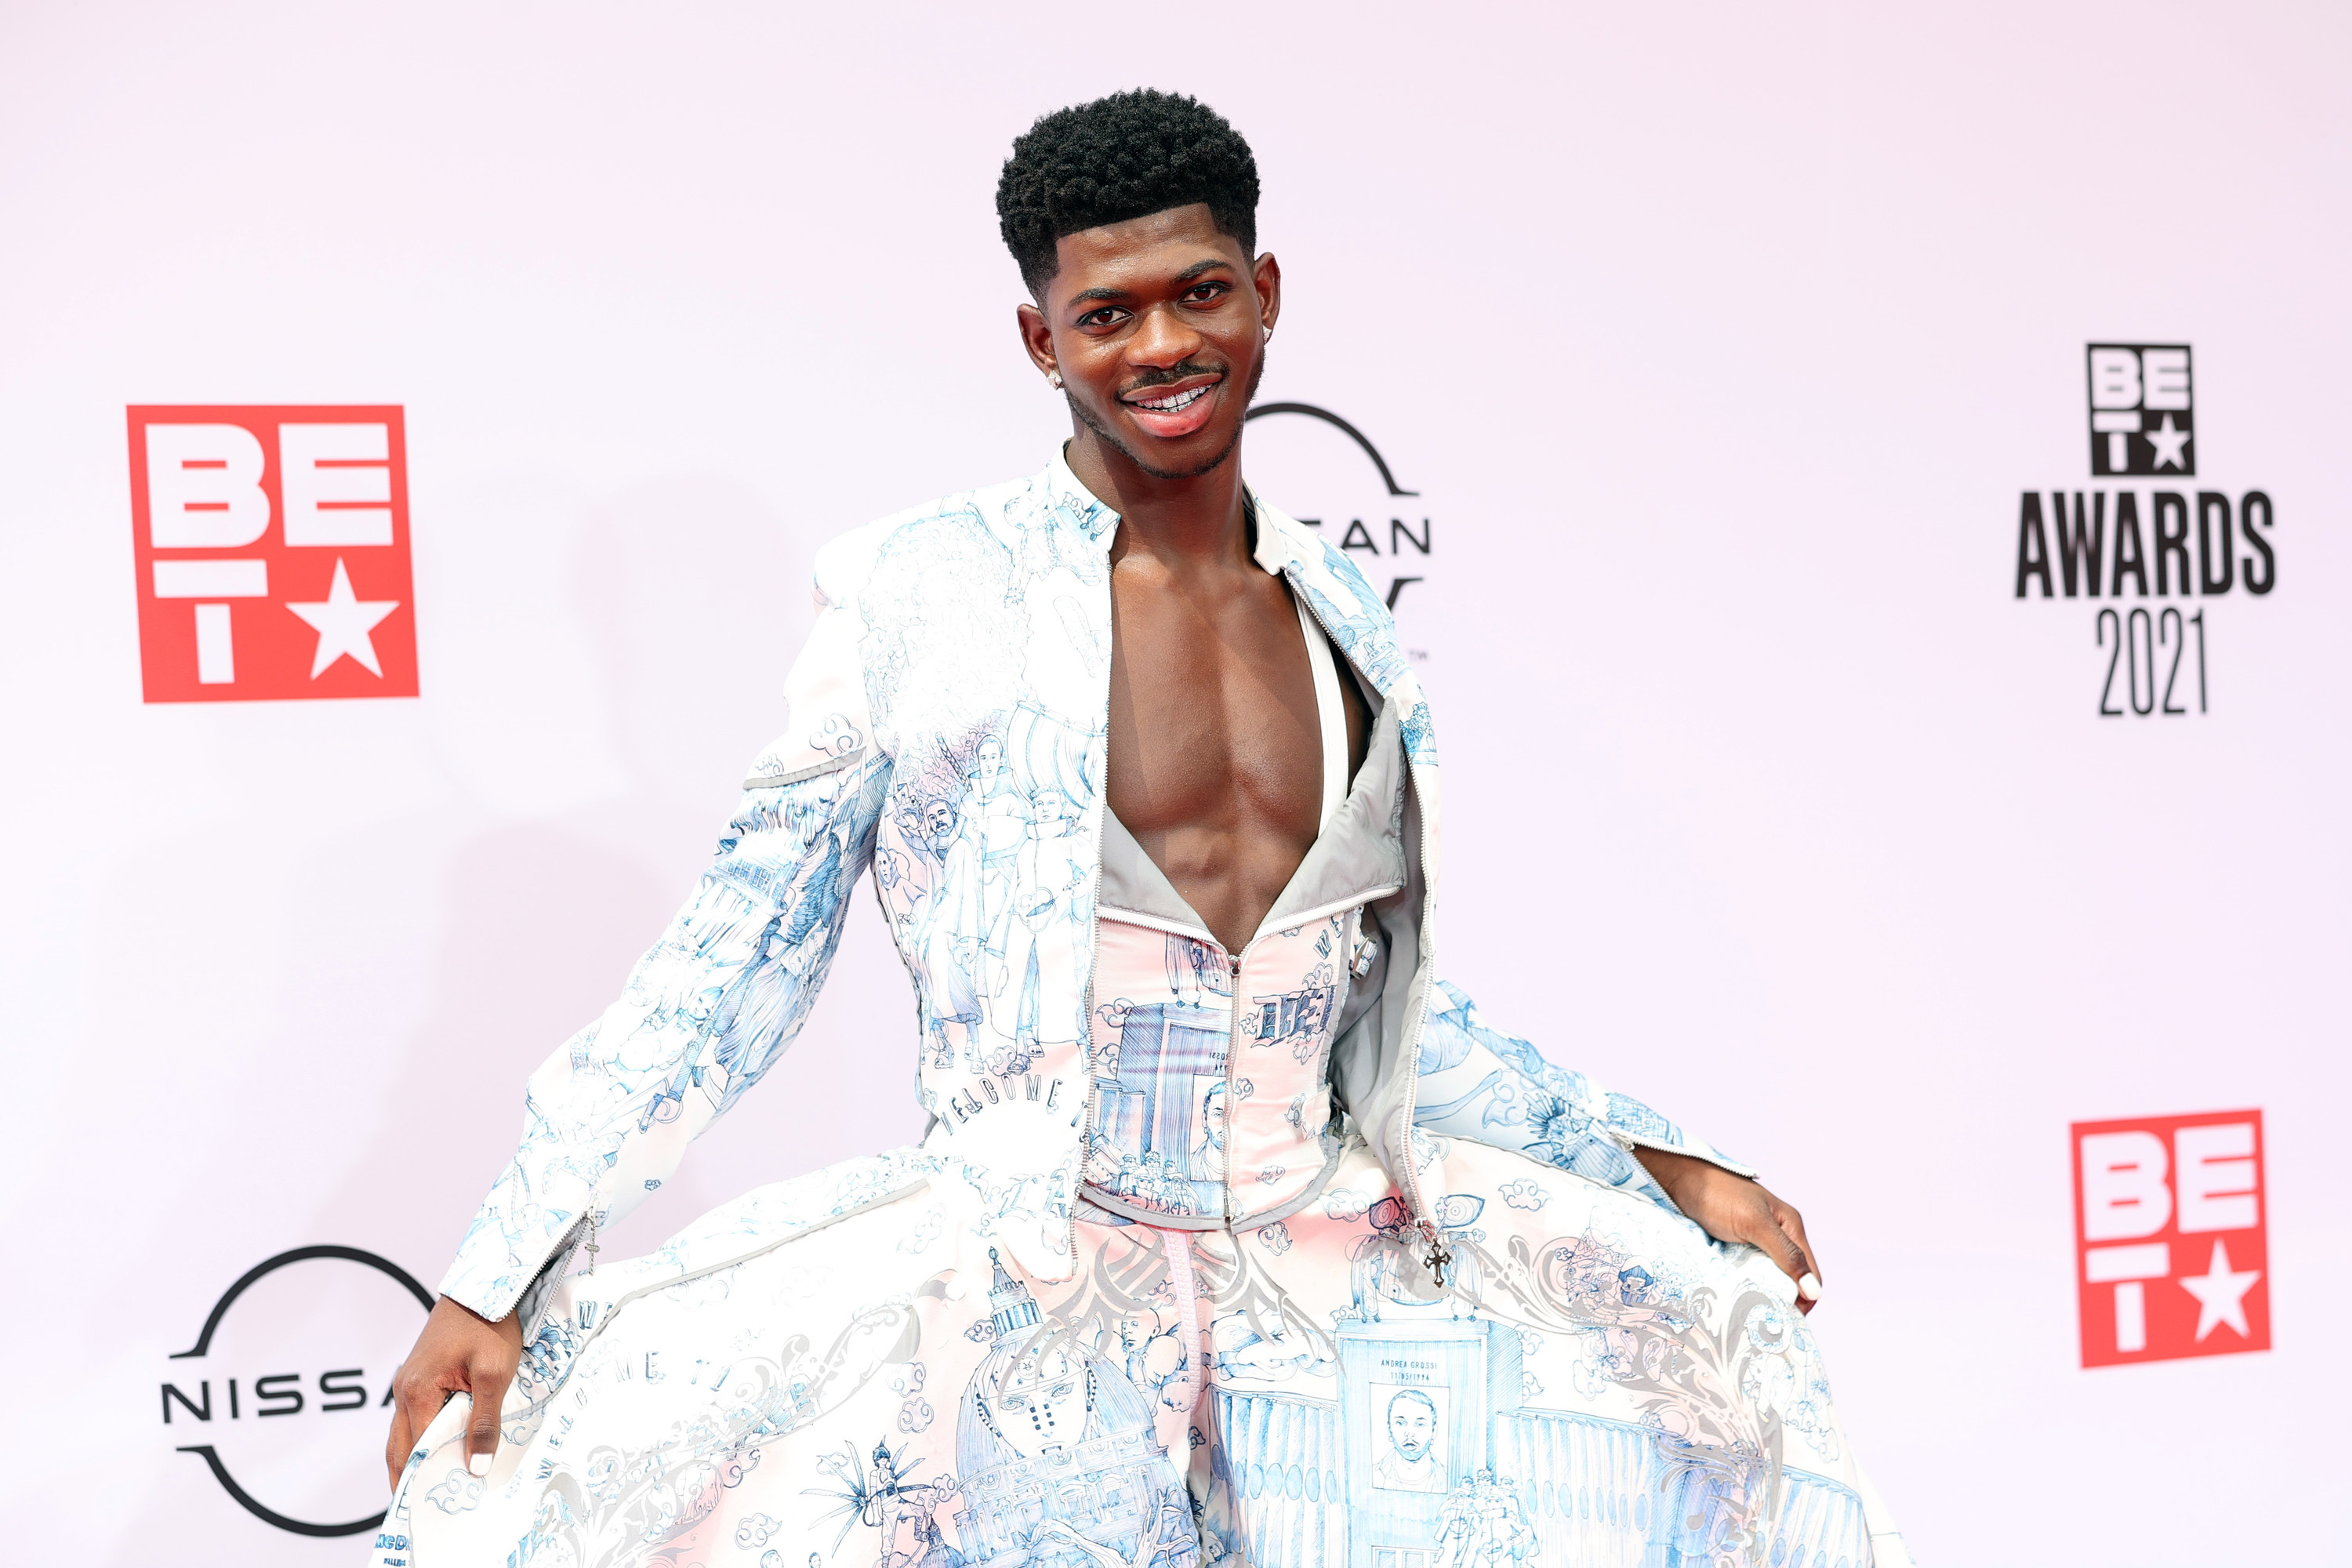 Lil Nas X in the outfit, holding out his skirts